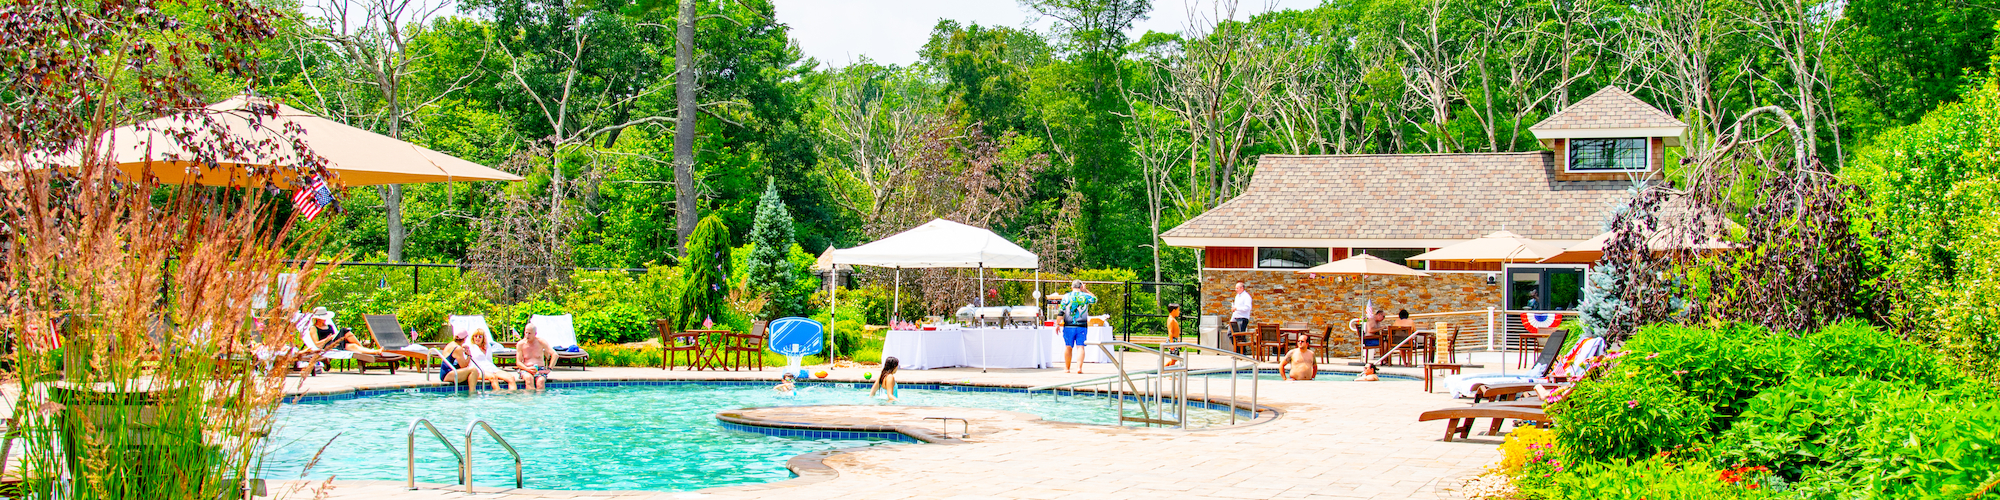 Families and friends enjoy the vibrant Pool Patio at The Preserve Resort & Spa, a luxurious event venue for summer gatherings.